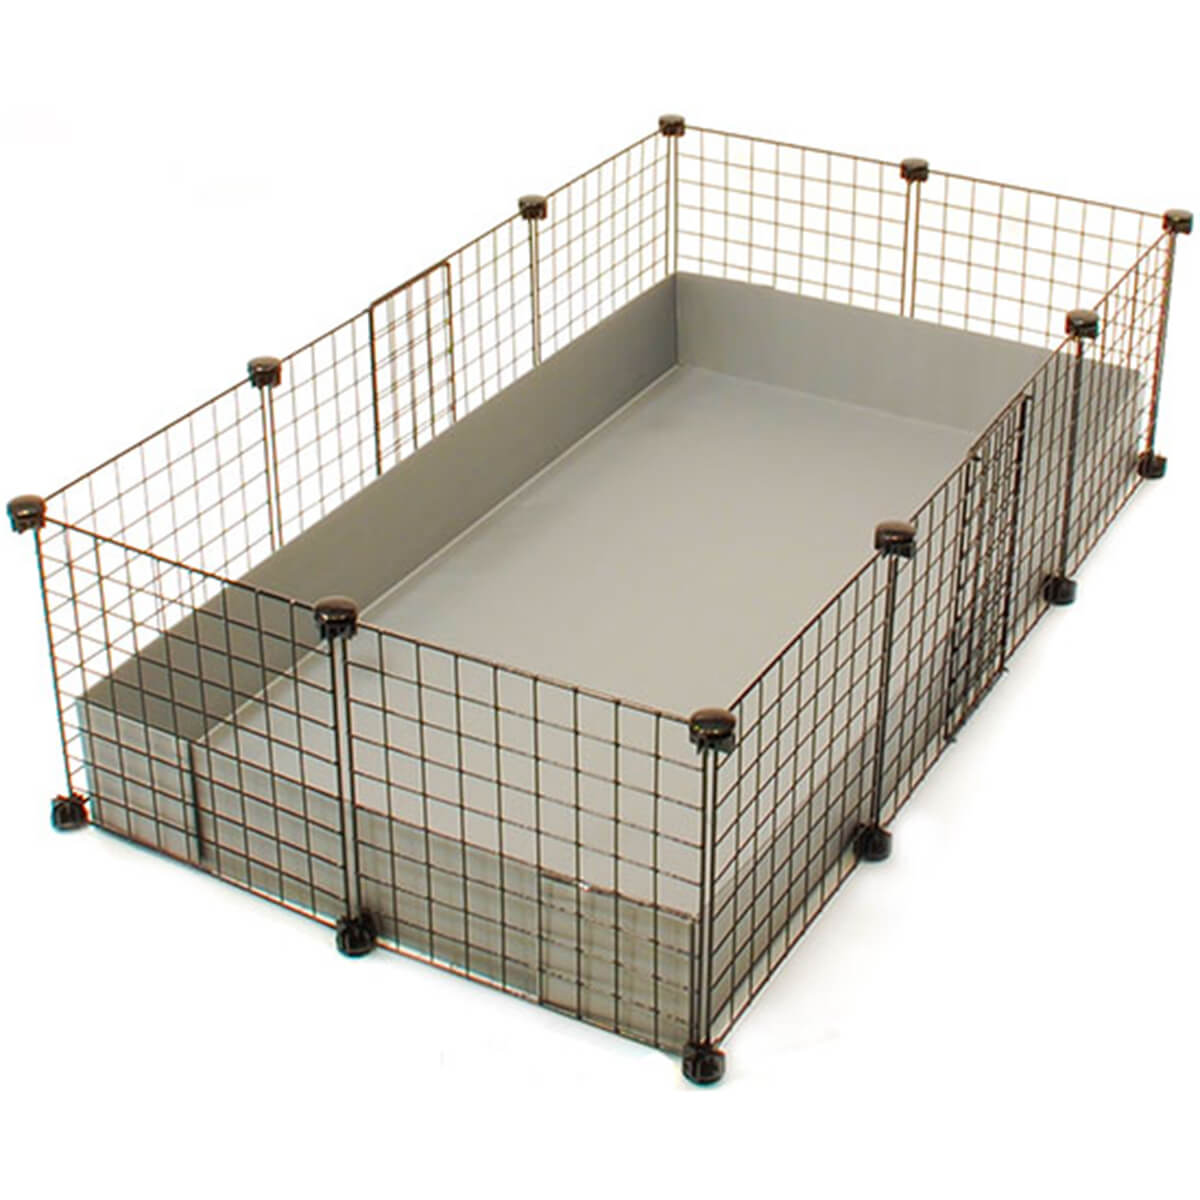 Flat cage. Контейнер для морской свинки. Guinea Cage. Guinea Pig Cages. Guinea Pigs in the Cage Cage.